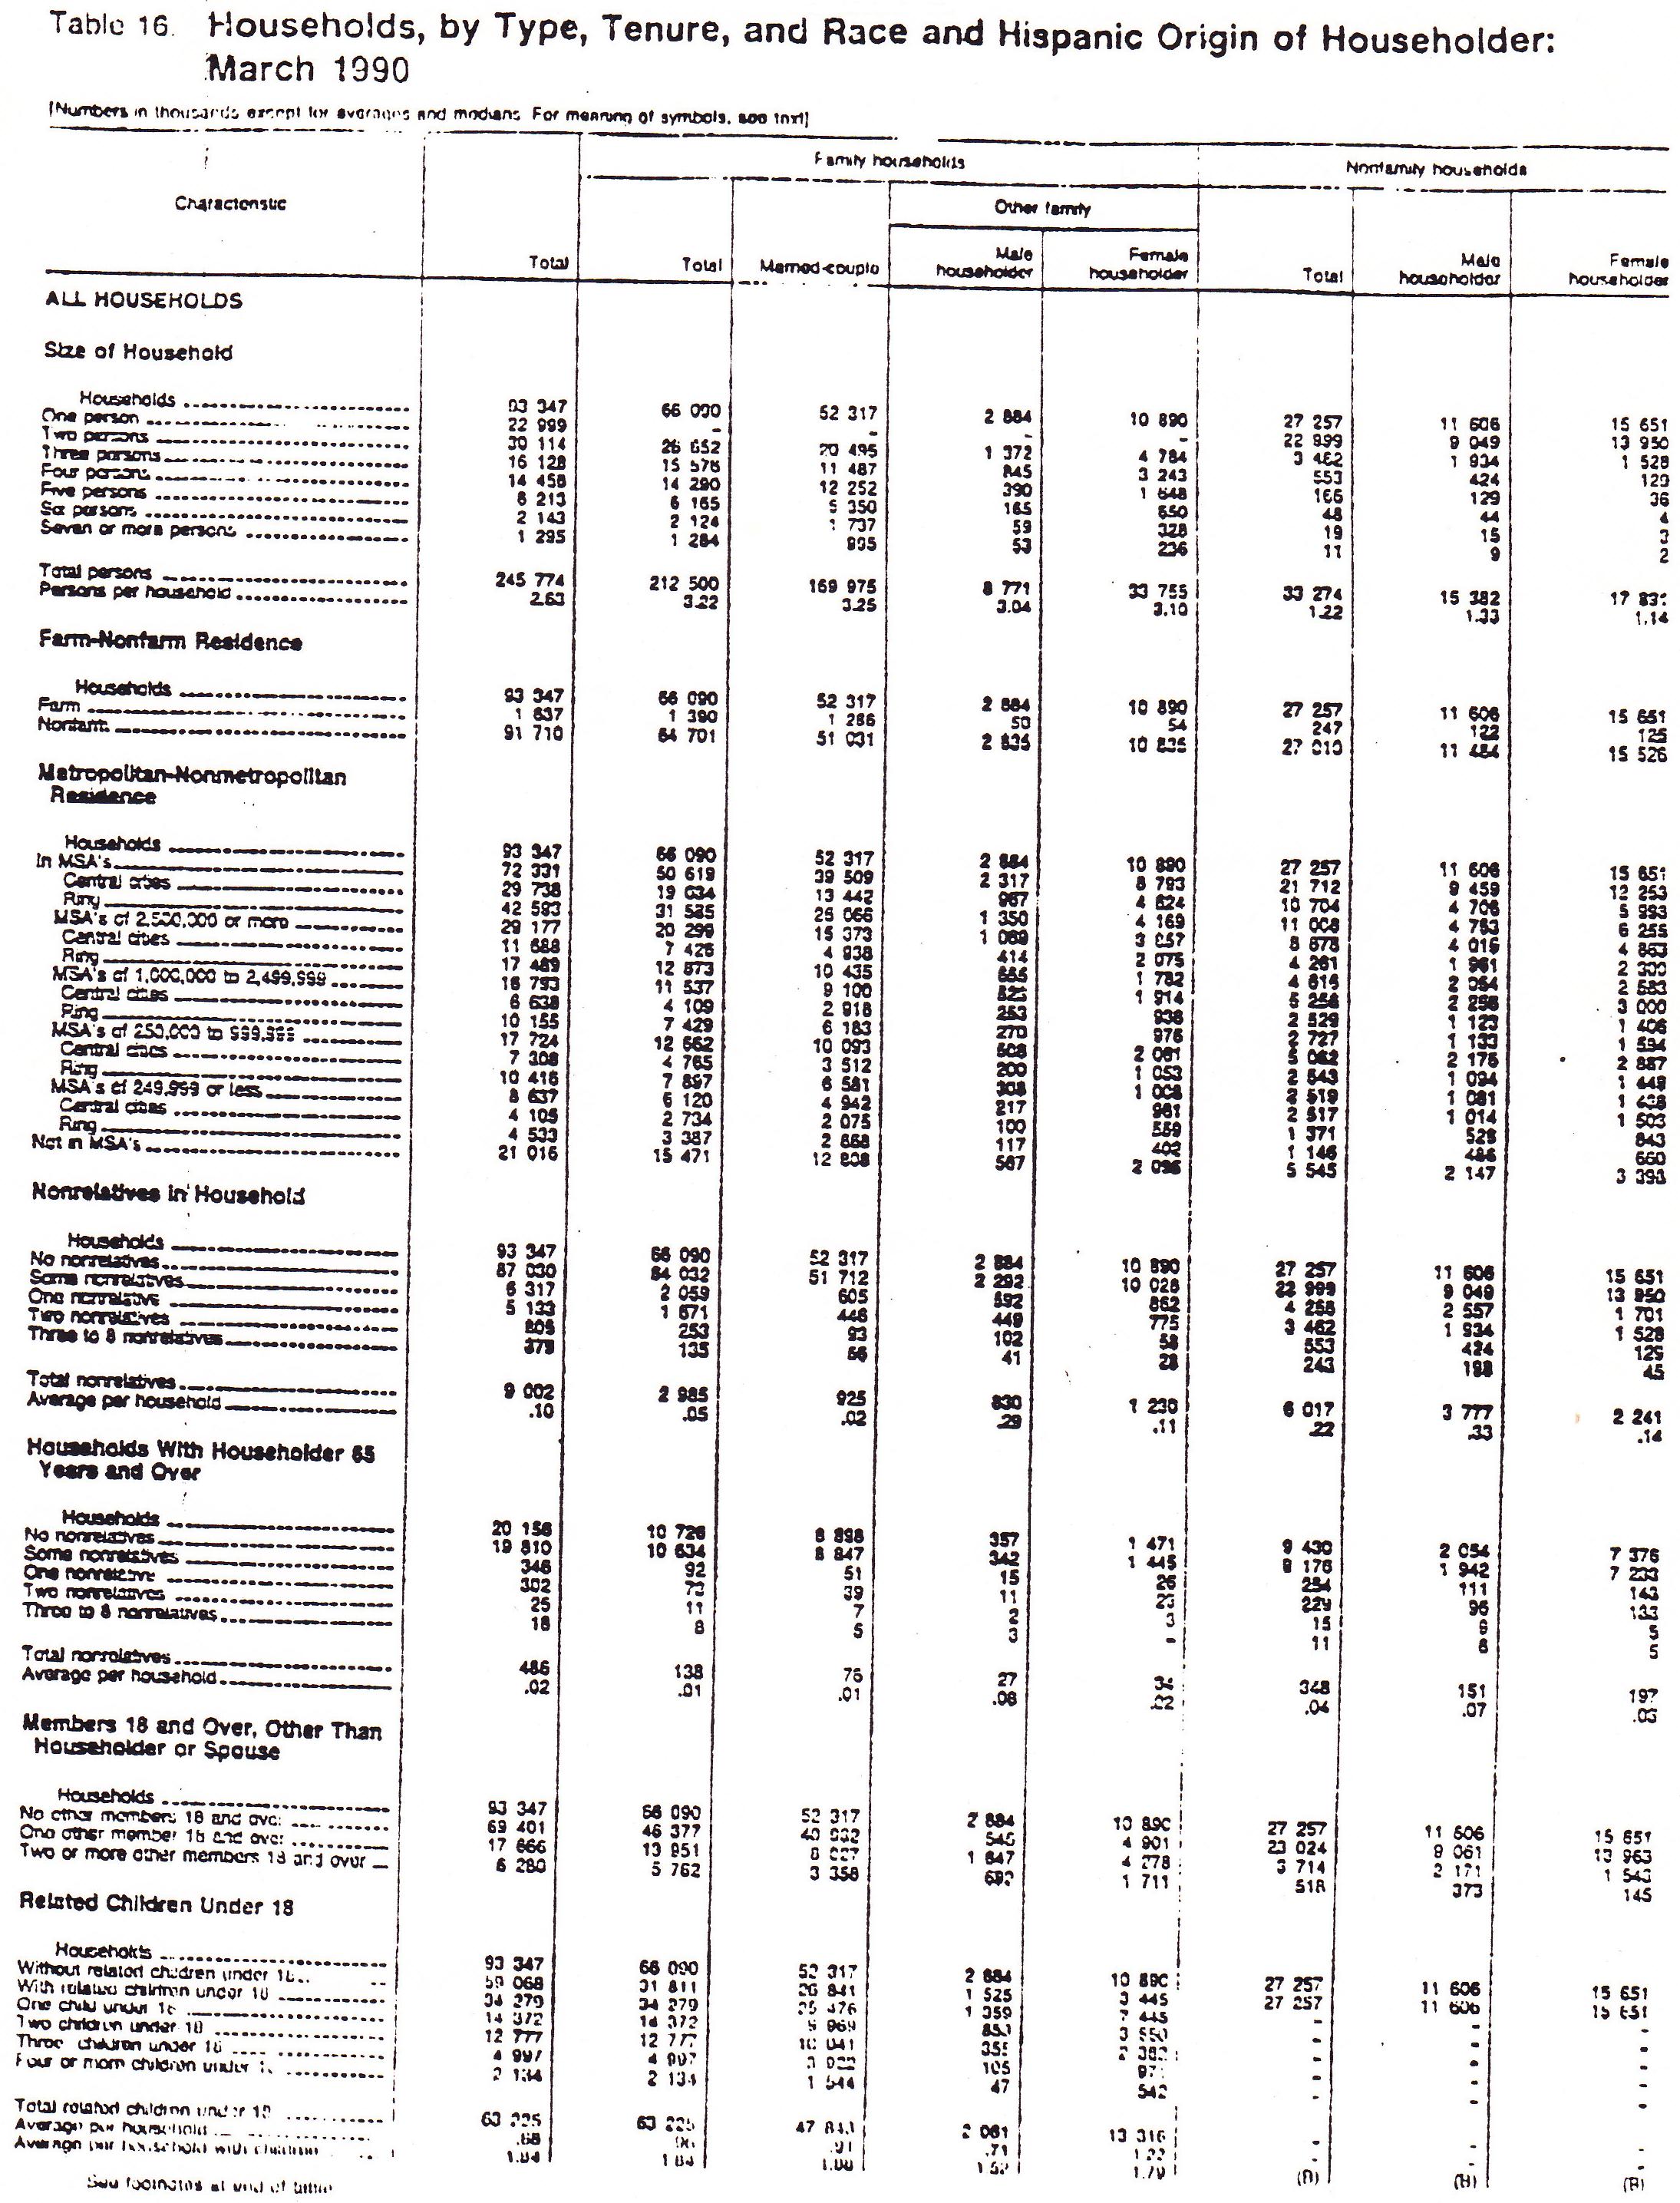 Table of information, some of which is unreadable.